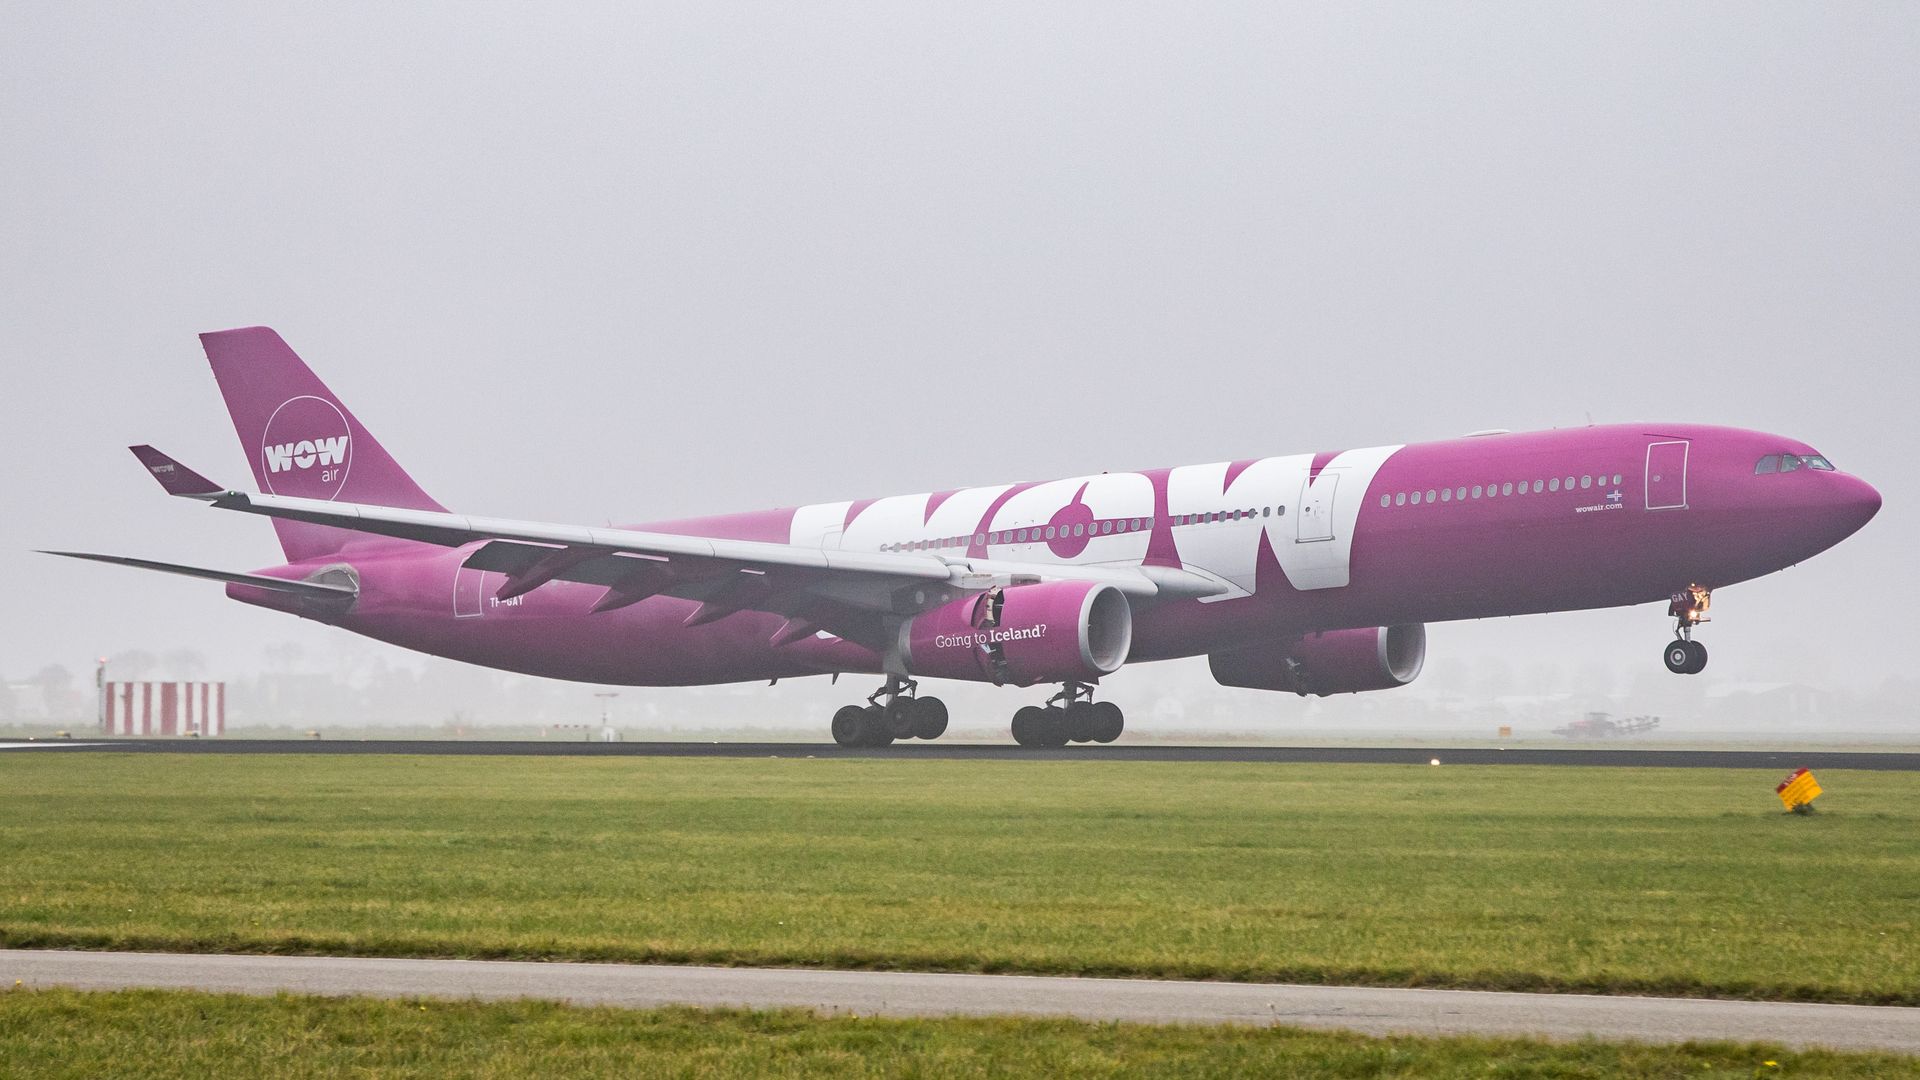 WOW Air airbus on the runway